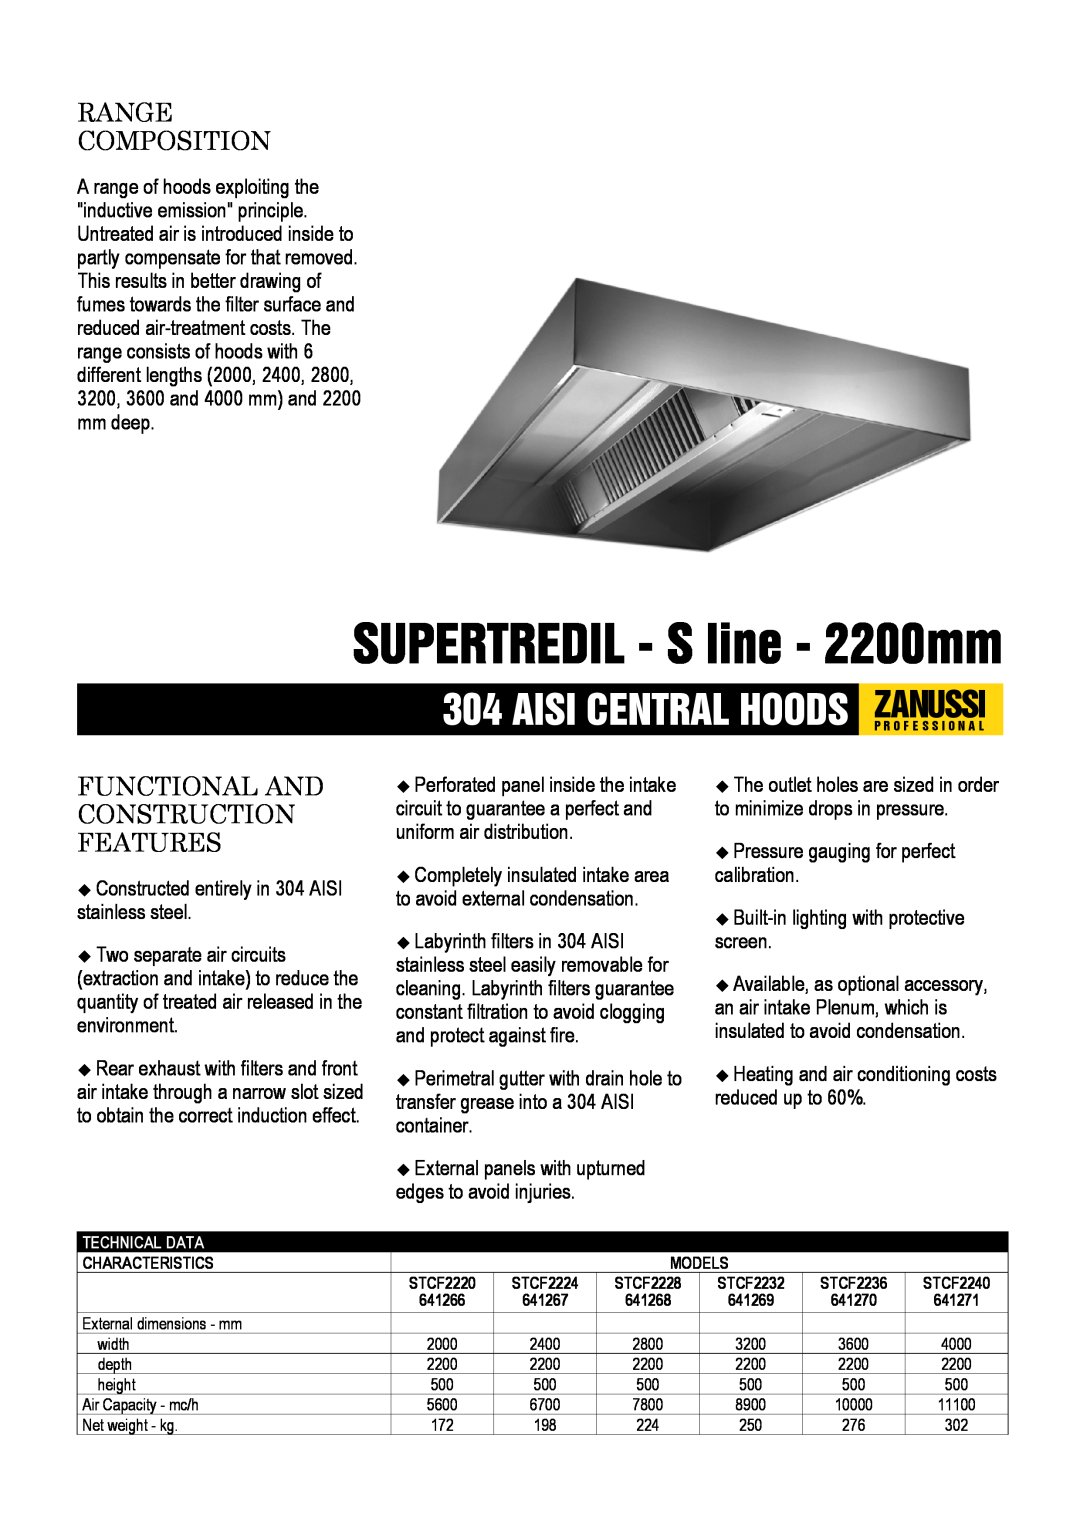 Zanussi 641266, 641271 dimensions SUPERTREDIL - S line - 2200mm, Range Composition, Functional And Construction Features 